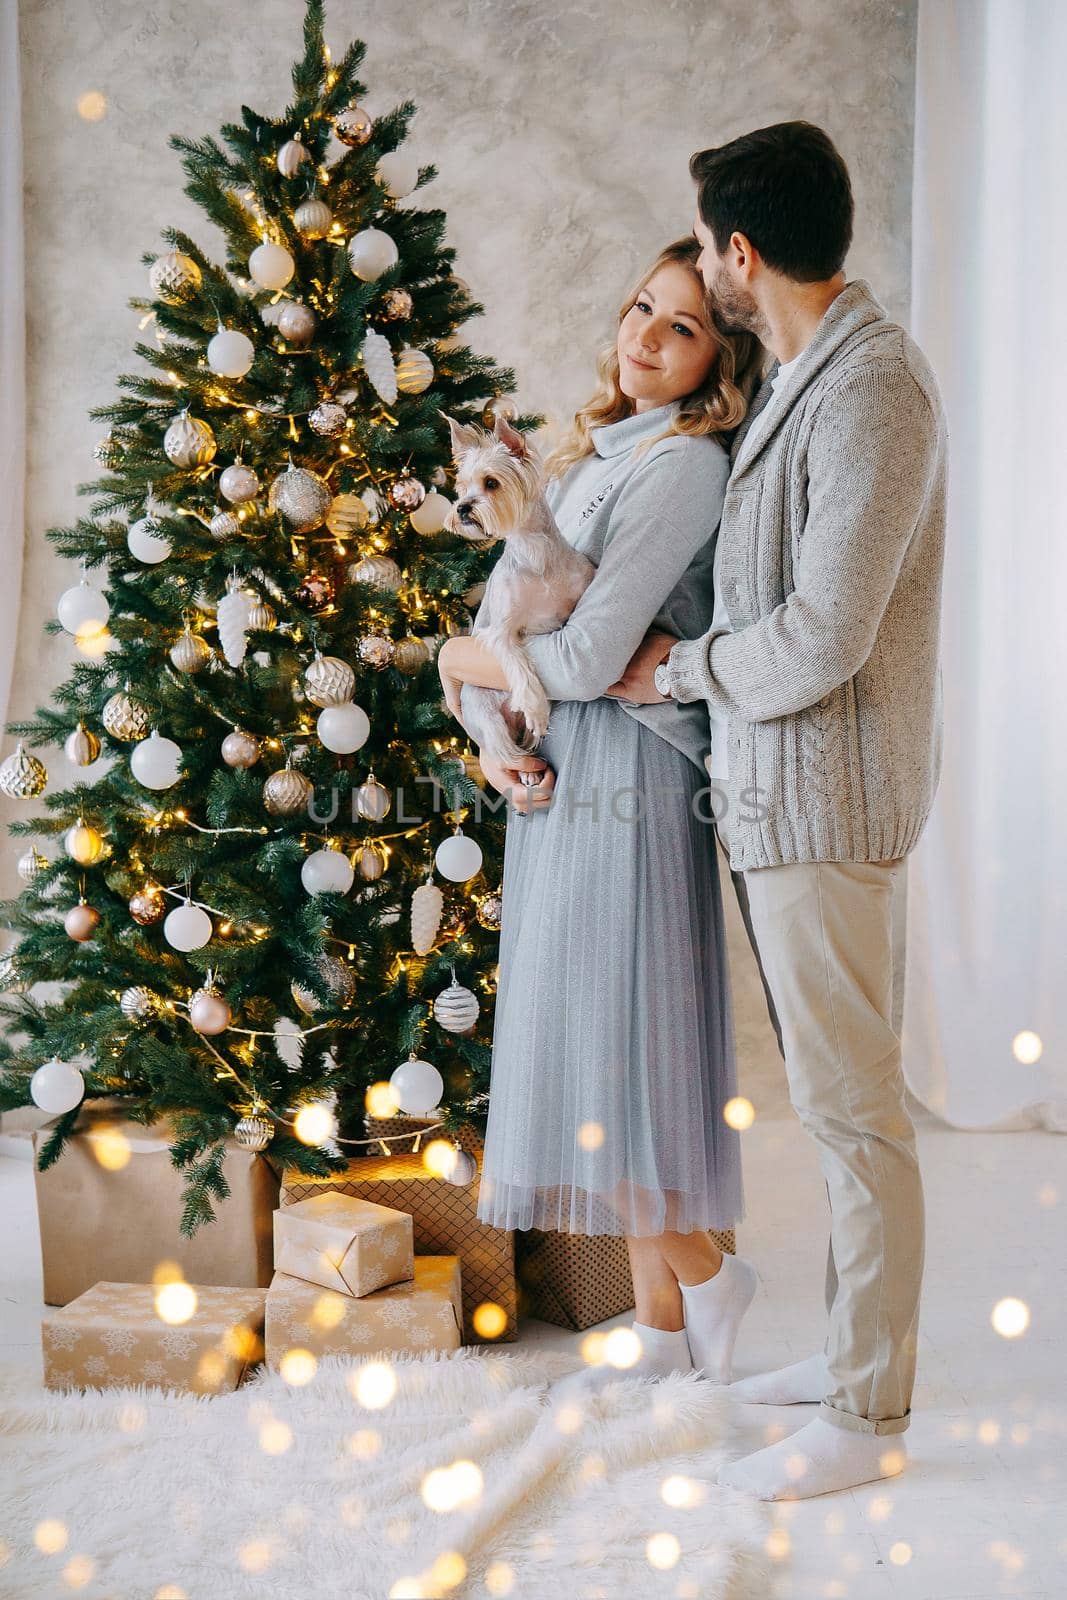 A happy couple in love - a man and a woman. A family in a bright New Year's interior with a Christmas tree by Annu1tochka